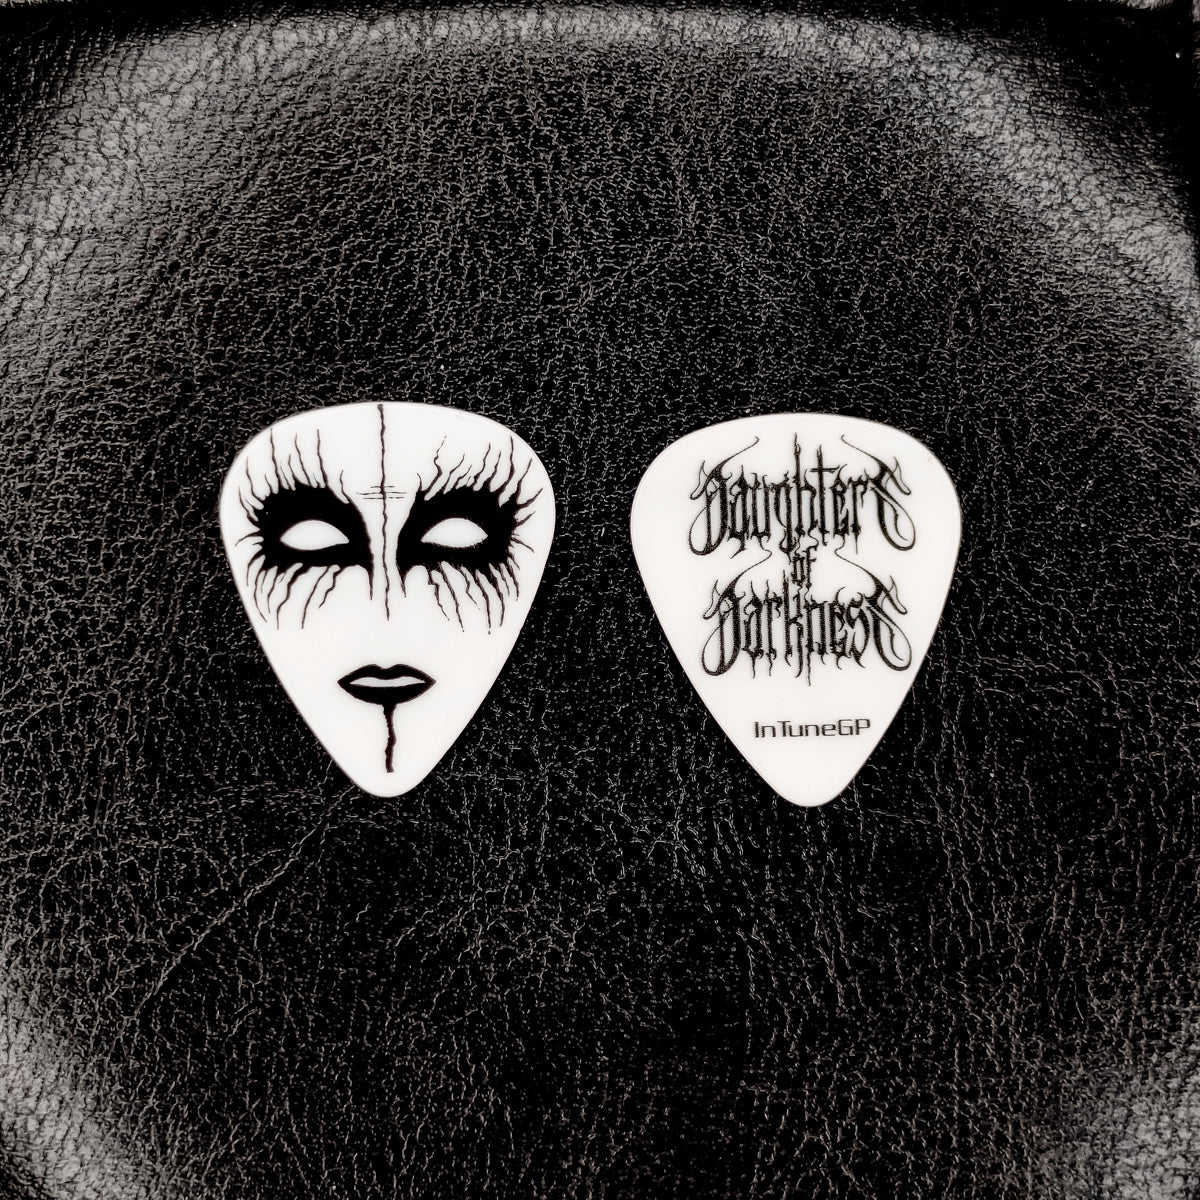 Daughters of Darkness - Leanansidthe - Guitar Pick